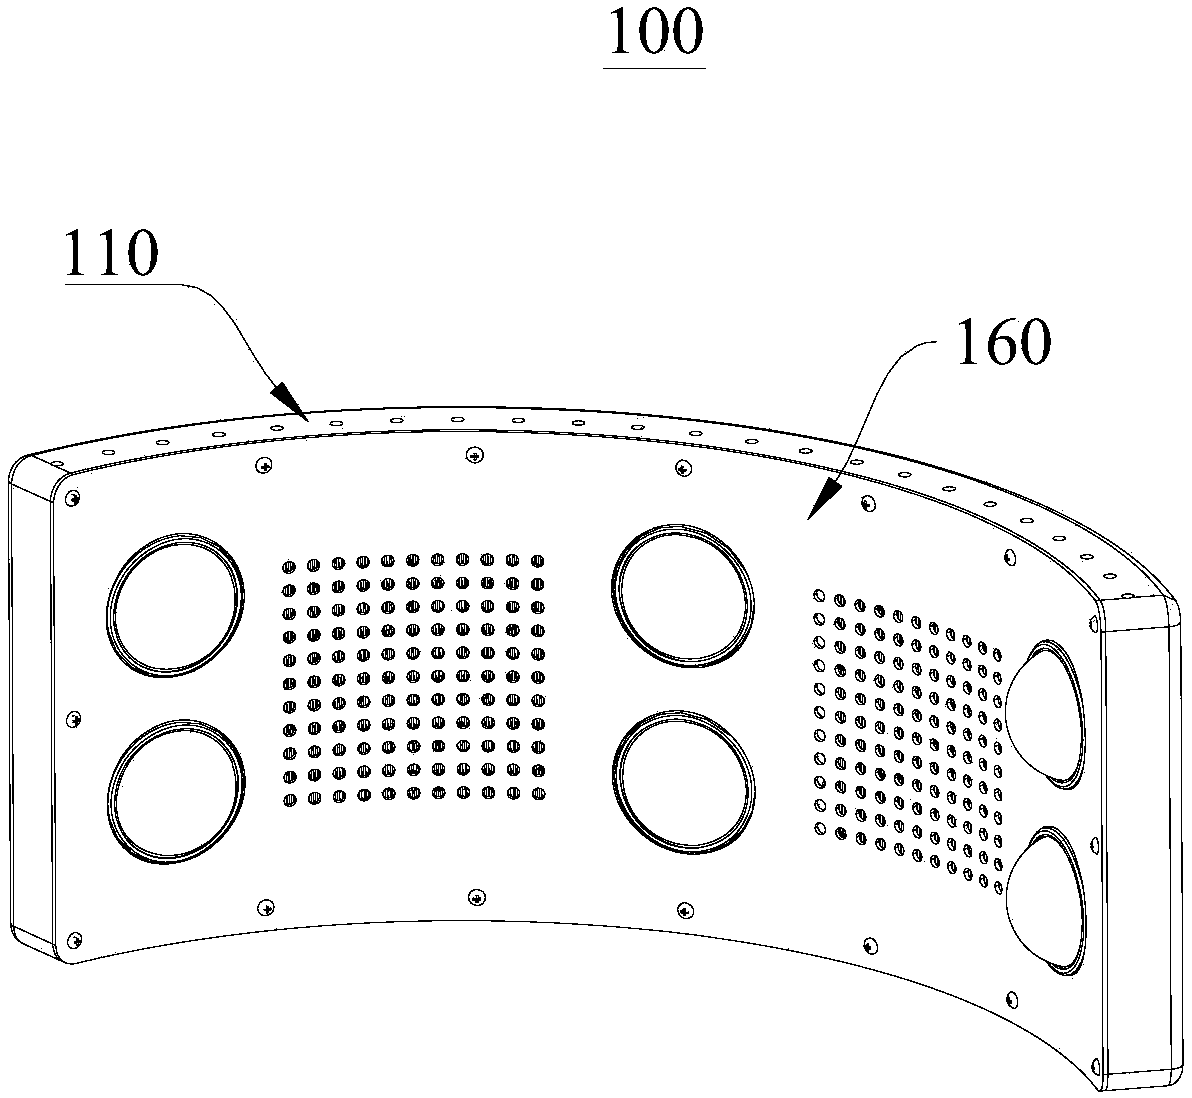 Heat radiation protection device and spectrum therapy instrument